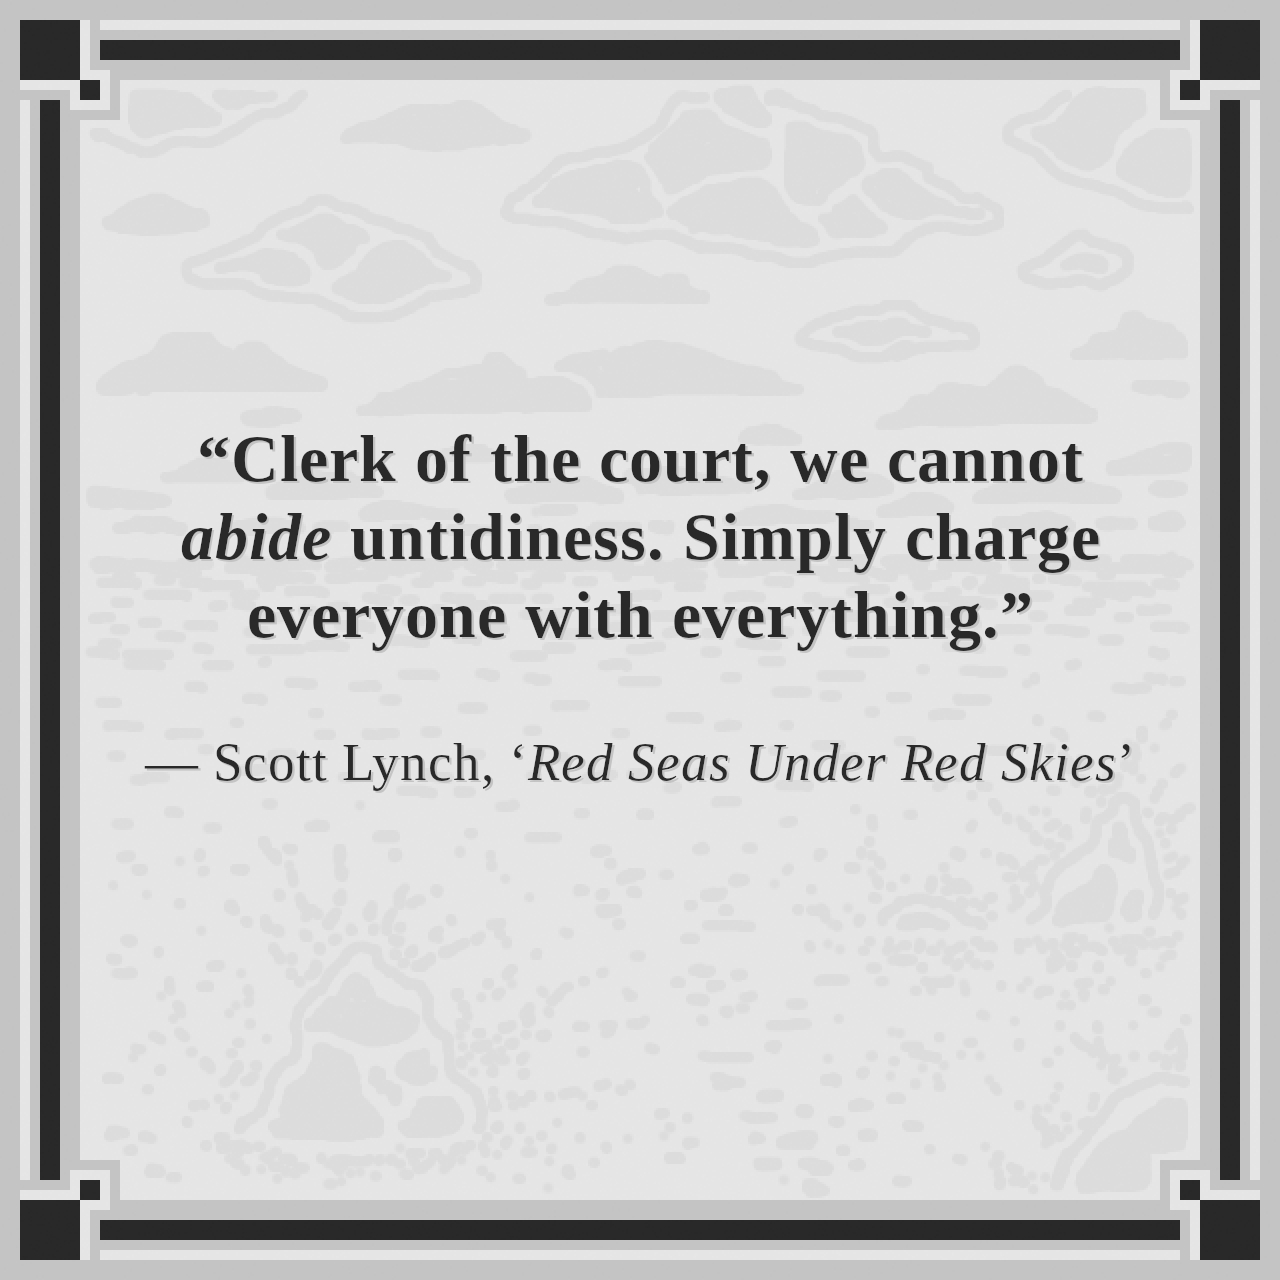 “Clerk of the court, we cannot abide untidiness. Simply charge everyone with everything.”

— Scott Lynch, ‘Red Seas Under Red Skies’